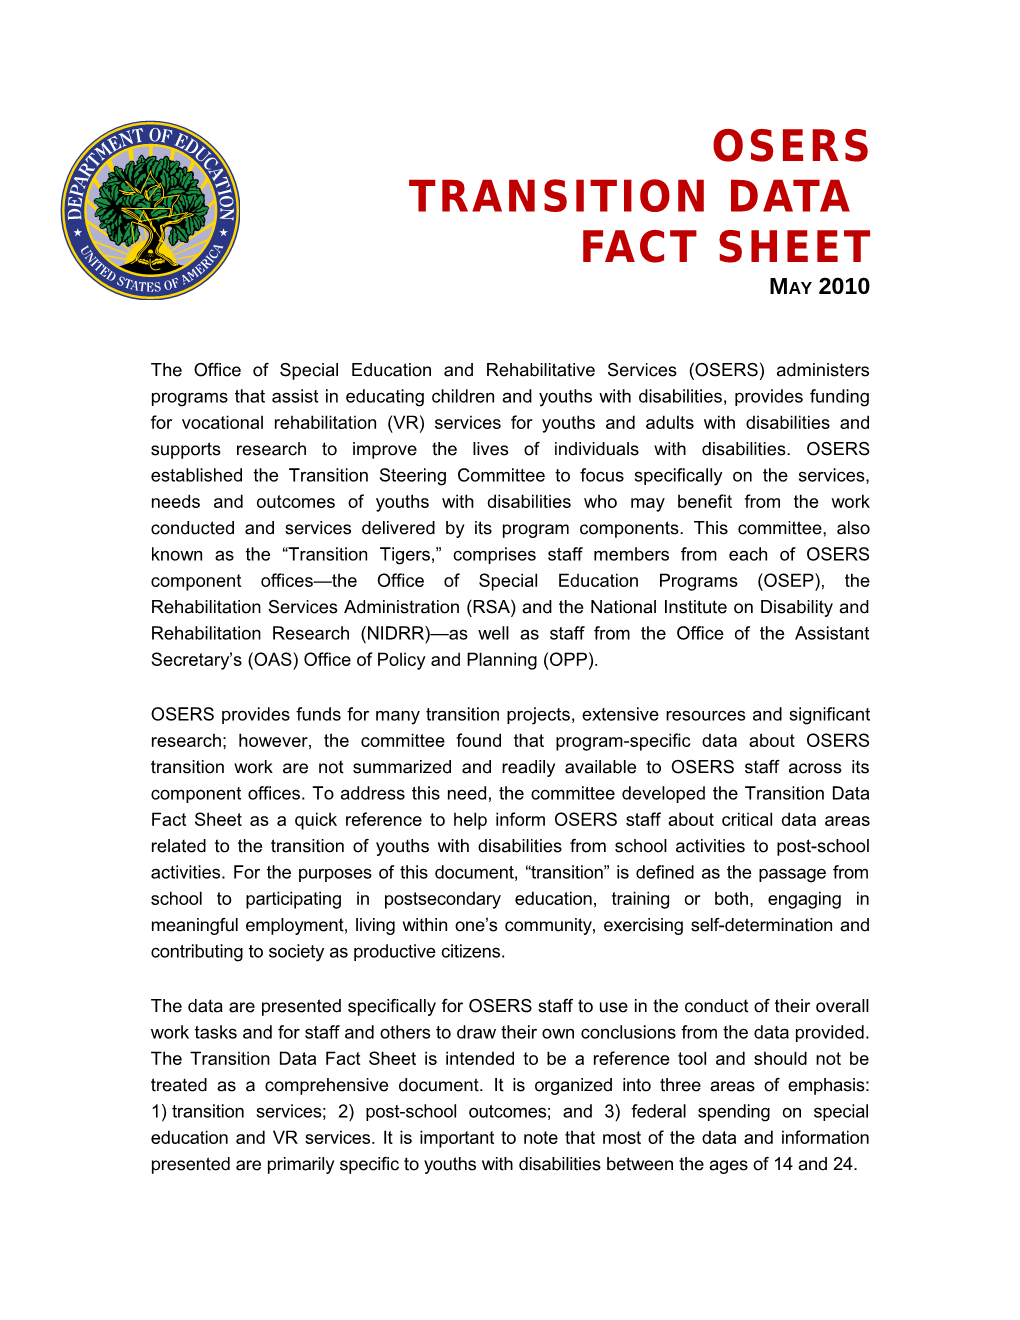 OSERS Transition Data Fact Sheet (MS Word)